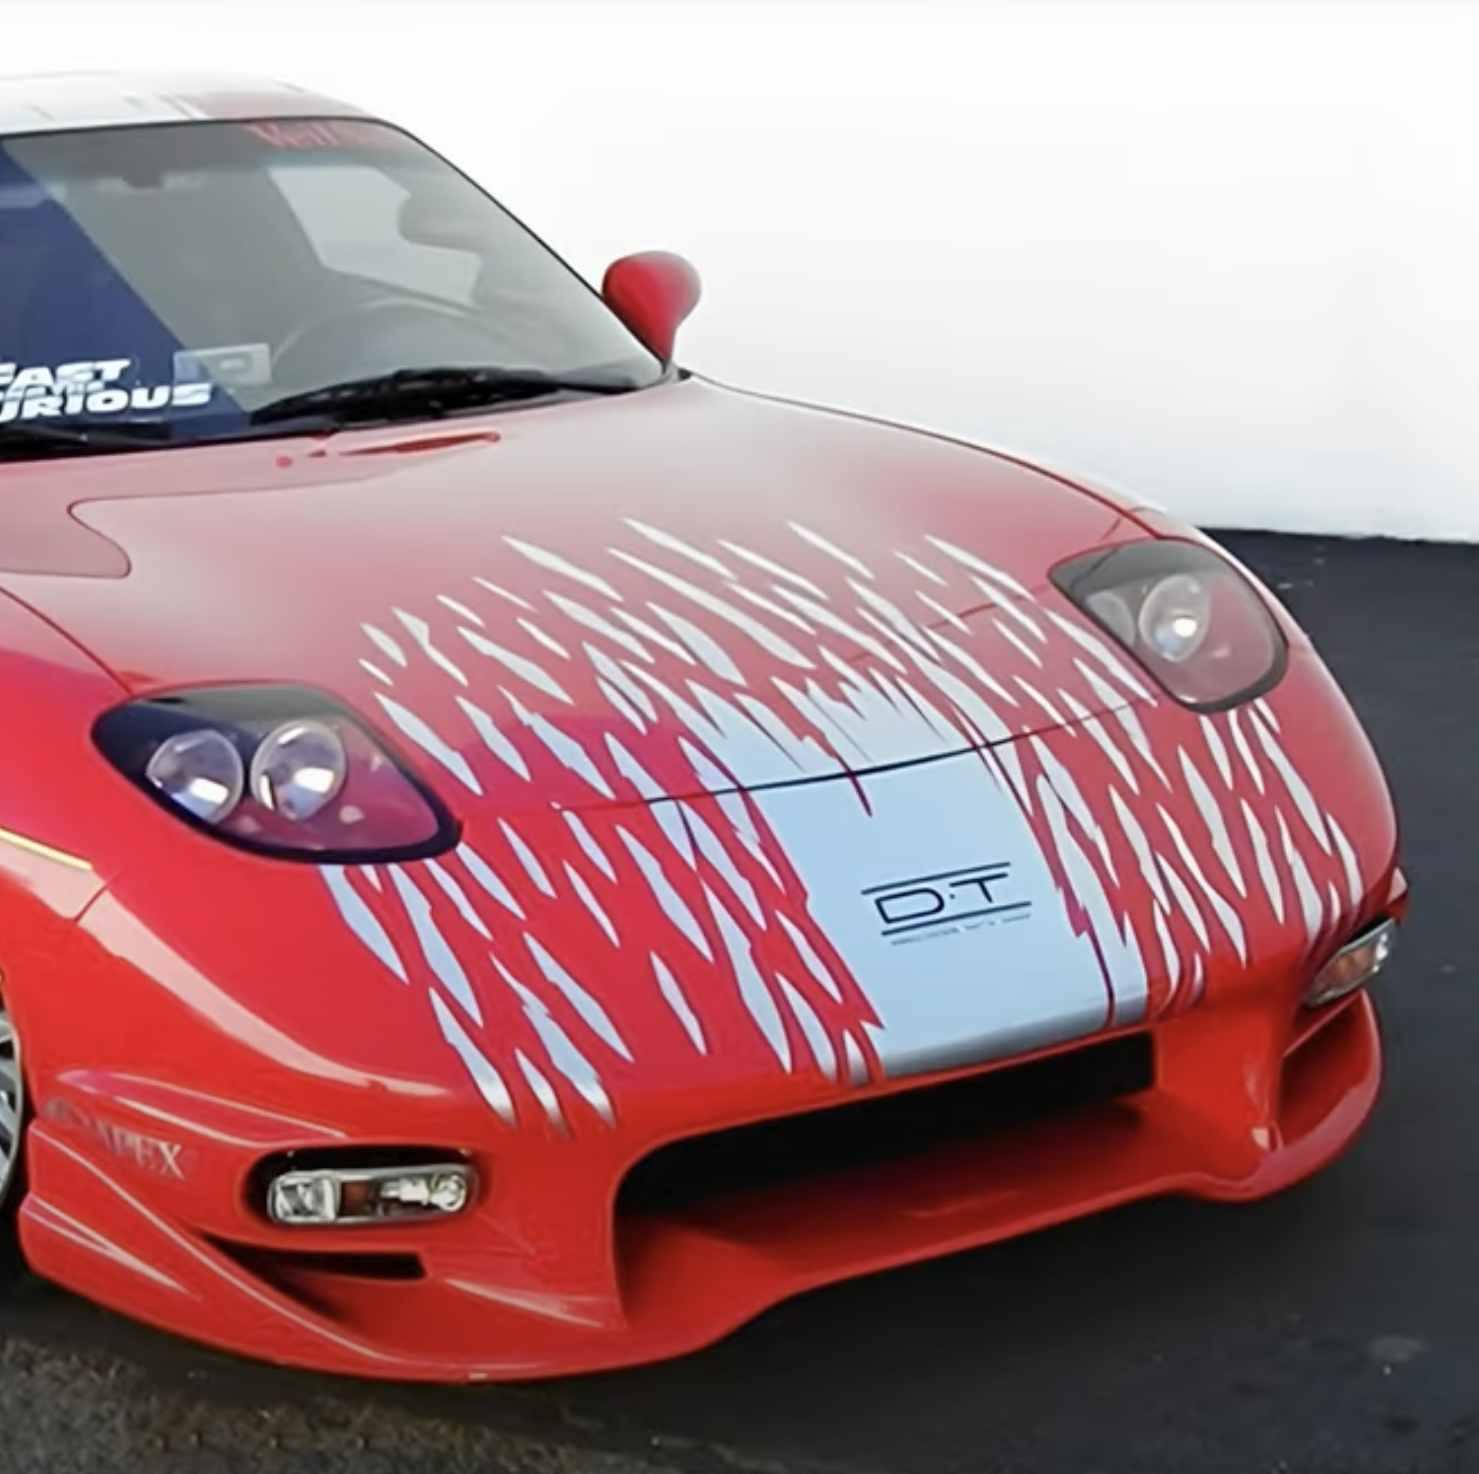 Dom's Mazda RX-7 From 'Fast and Furious' Is Missing